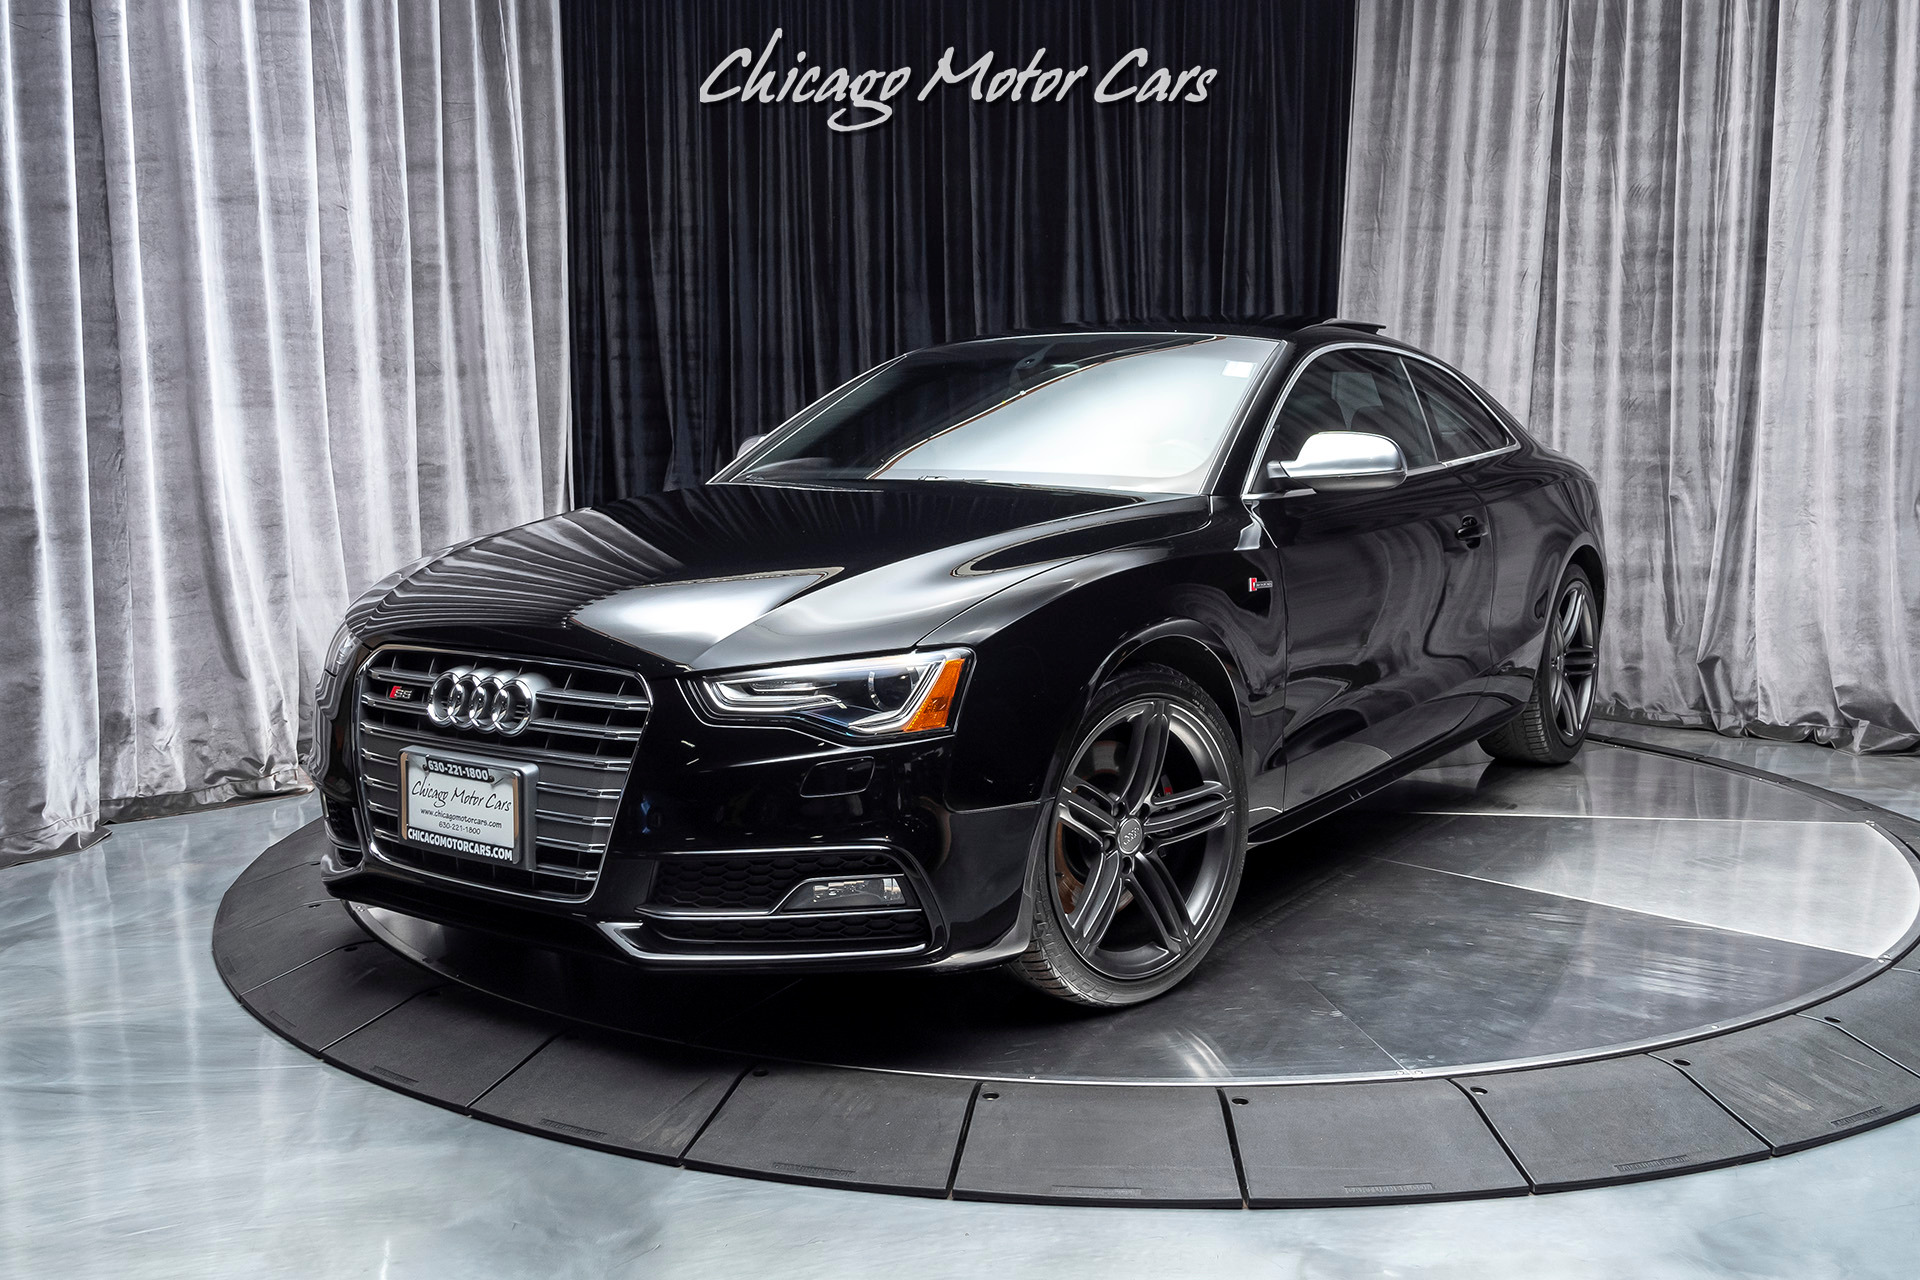 Used 2014 Audi S5 quattro Premium Plus Coupe Manual Transmission MSRP $60k+  For Sale (Special Pricing) | Chicago Motor Cars Stock #16825A